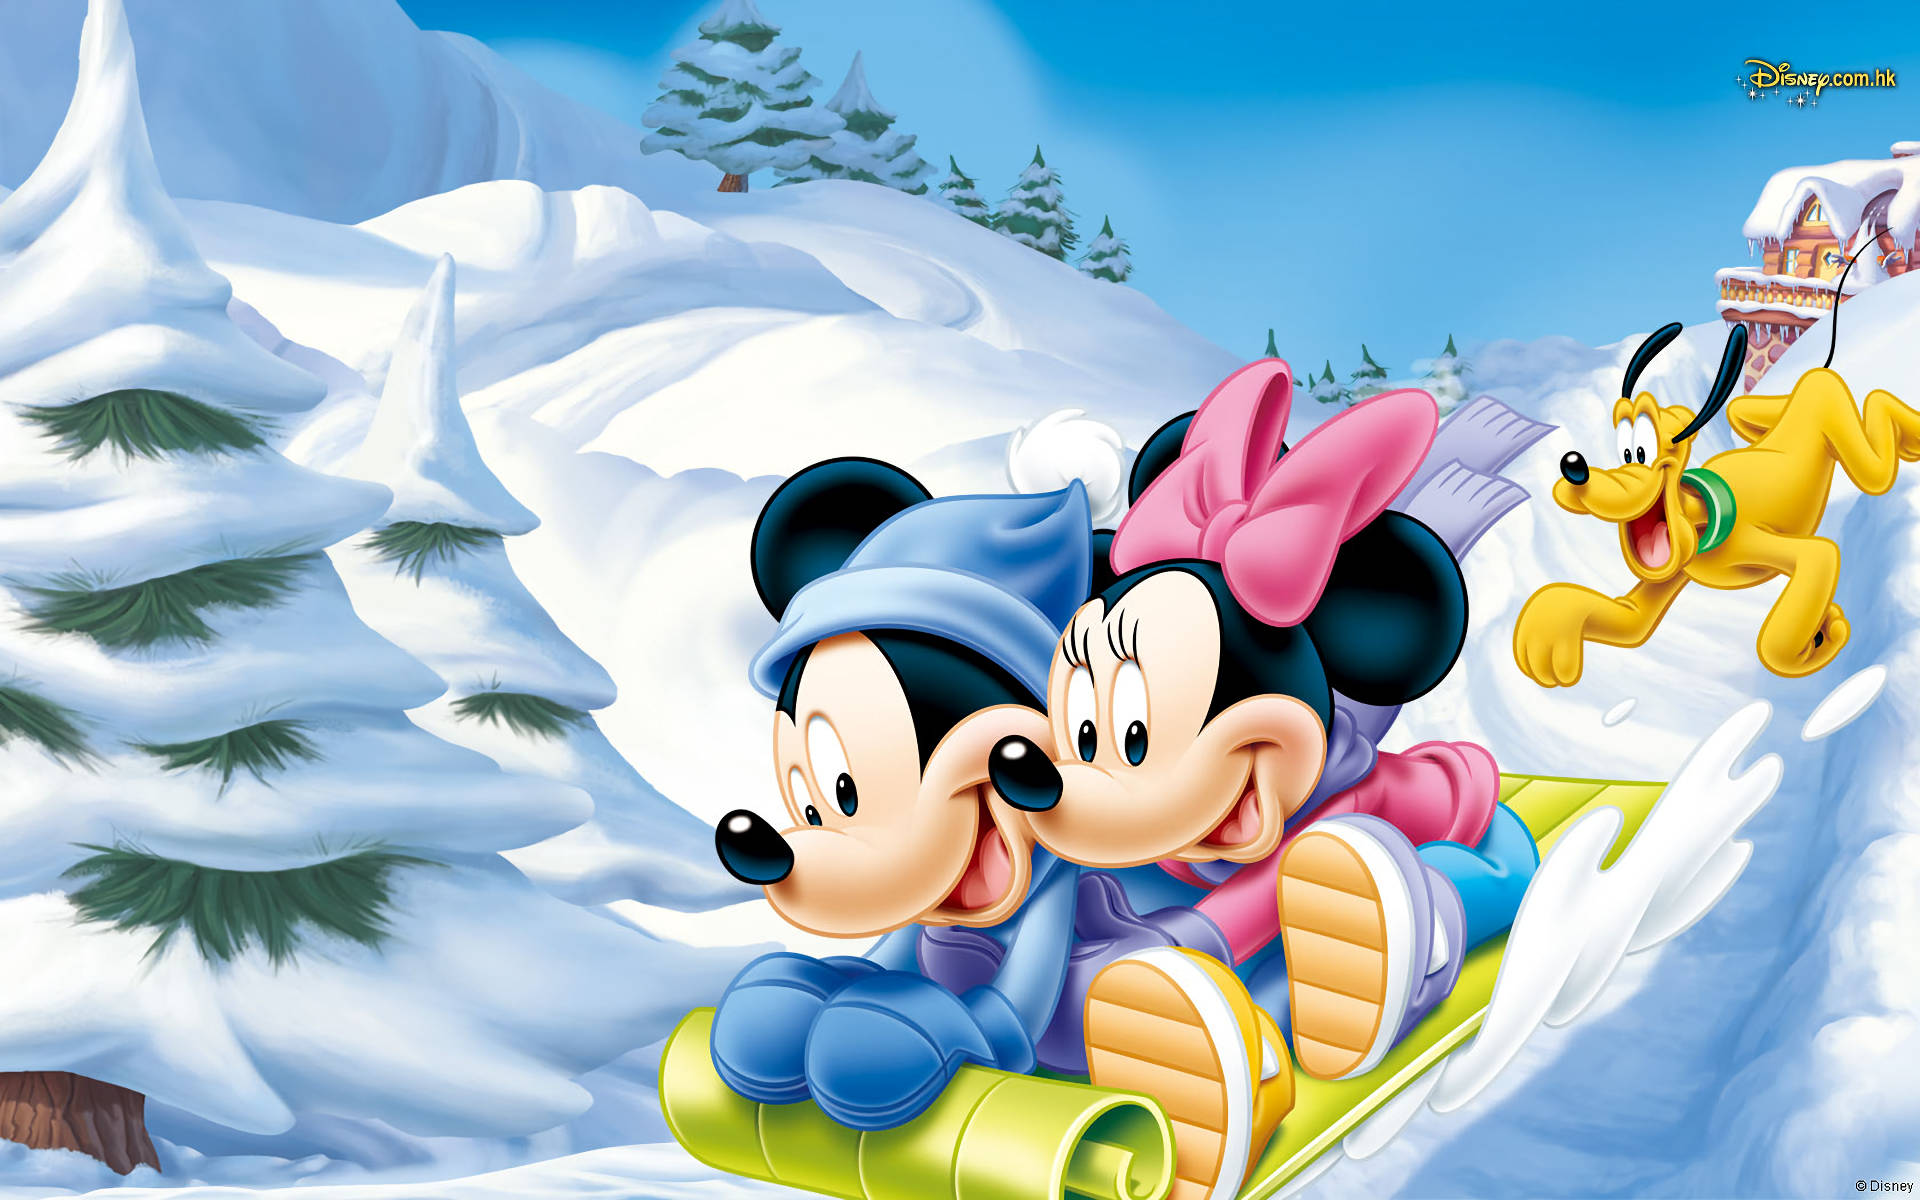 Disney Characters In Snow